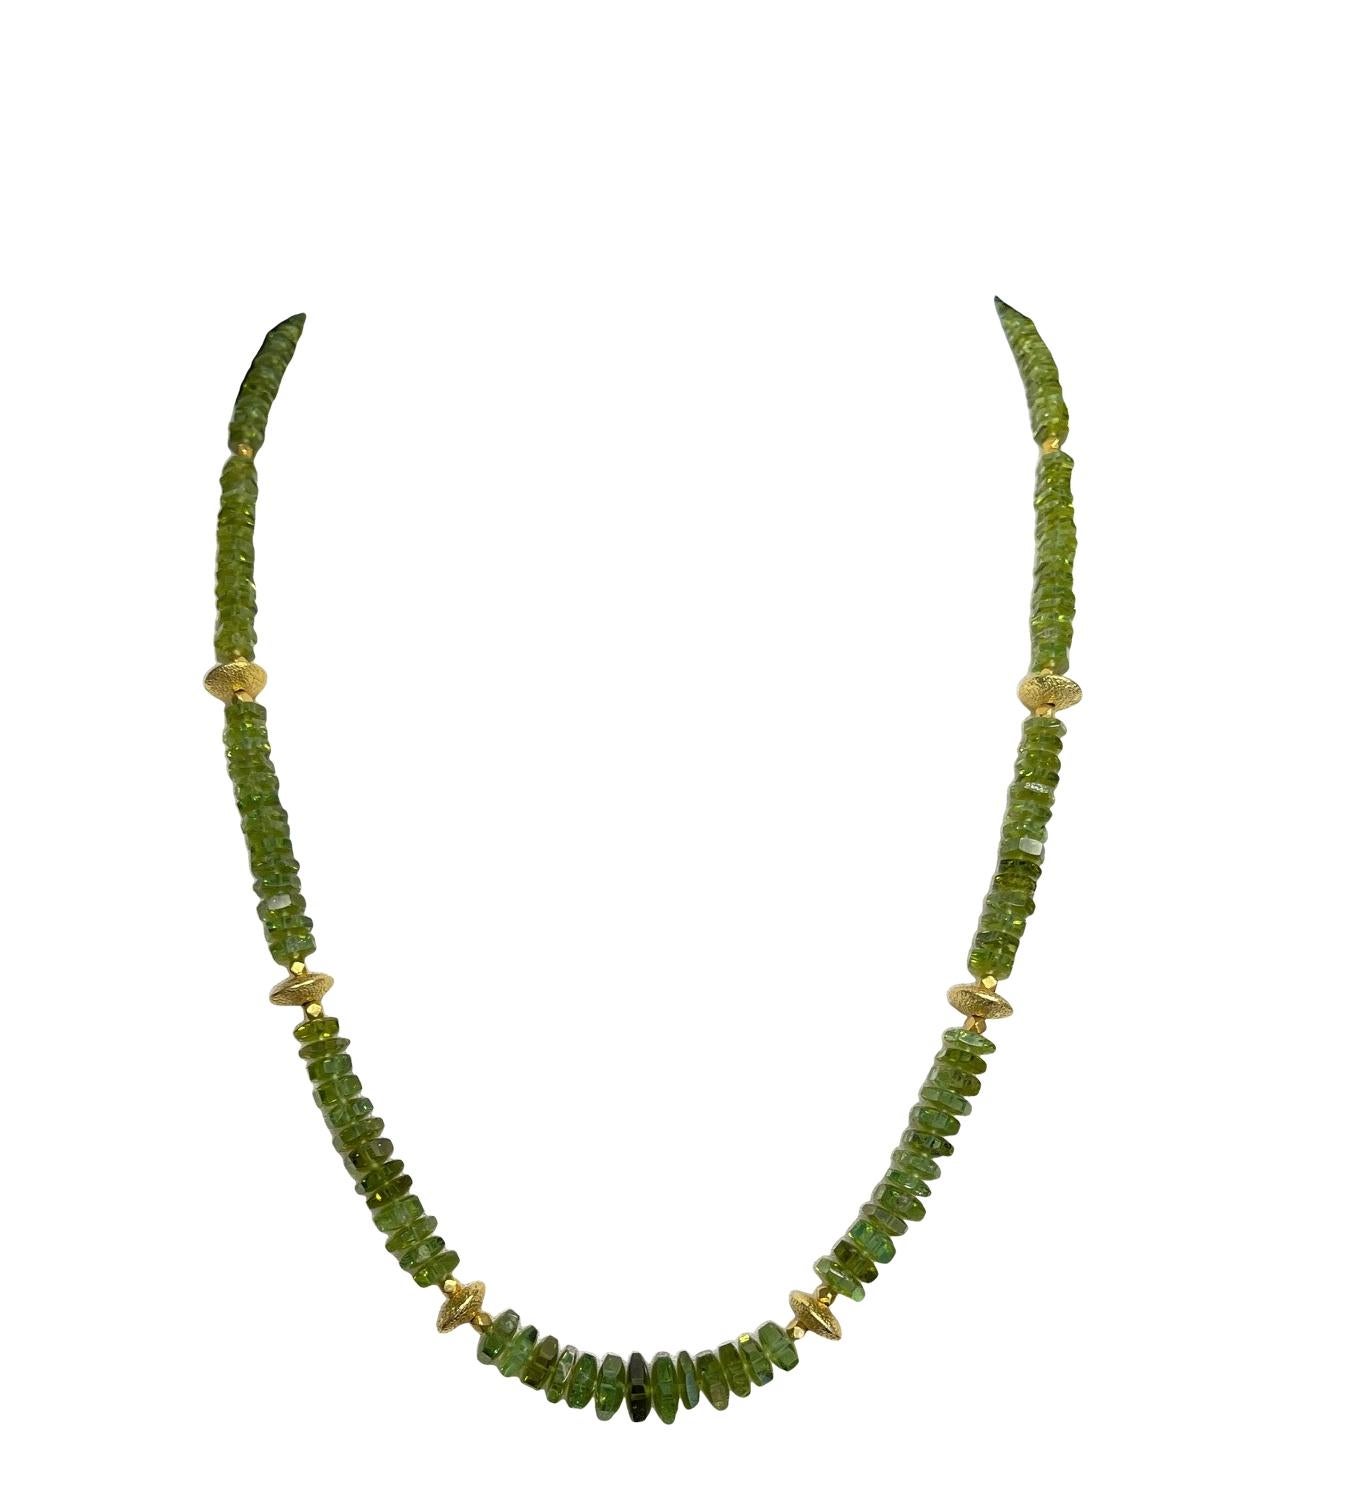 Green Tourmaline Bead and 18k Yellow Gold Necklace, Adjustable Length For Sale 6